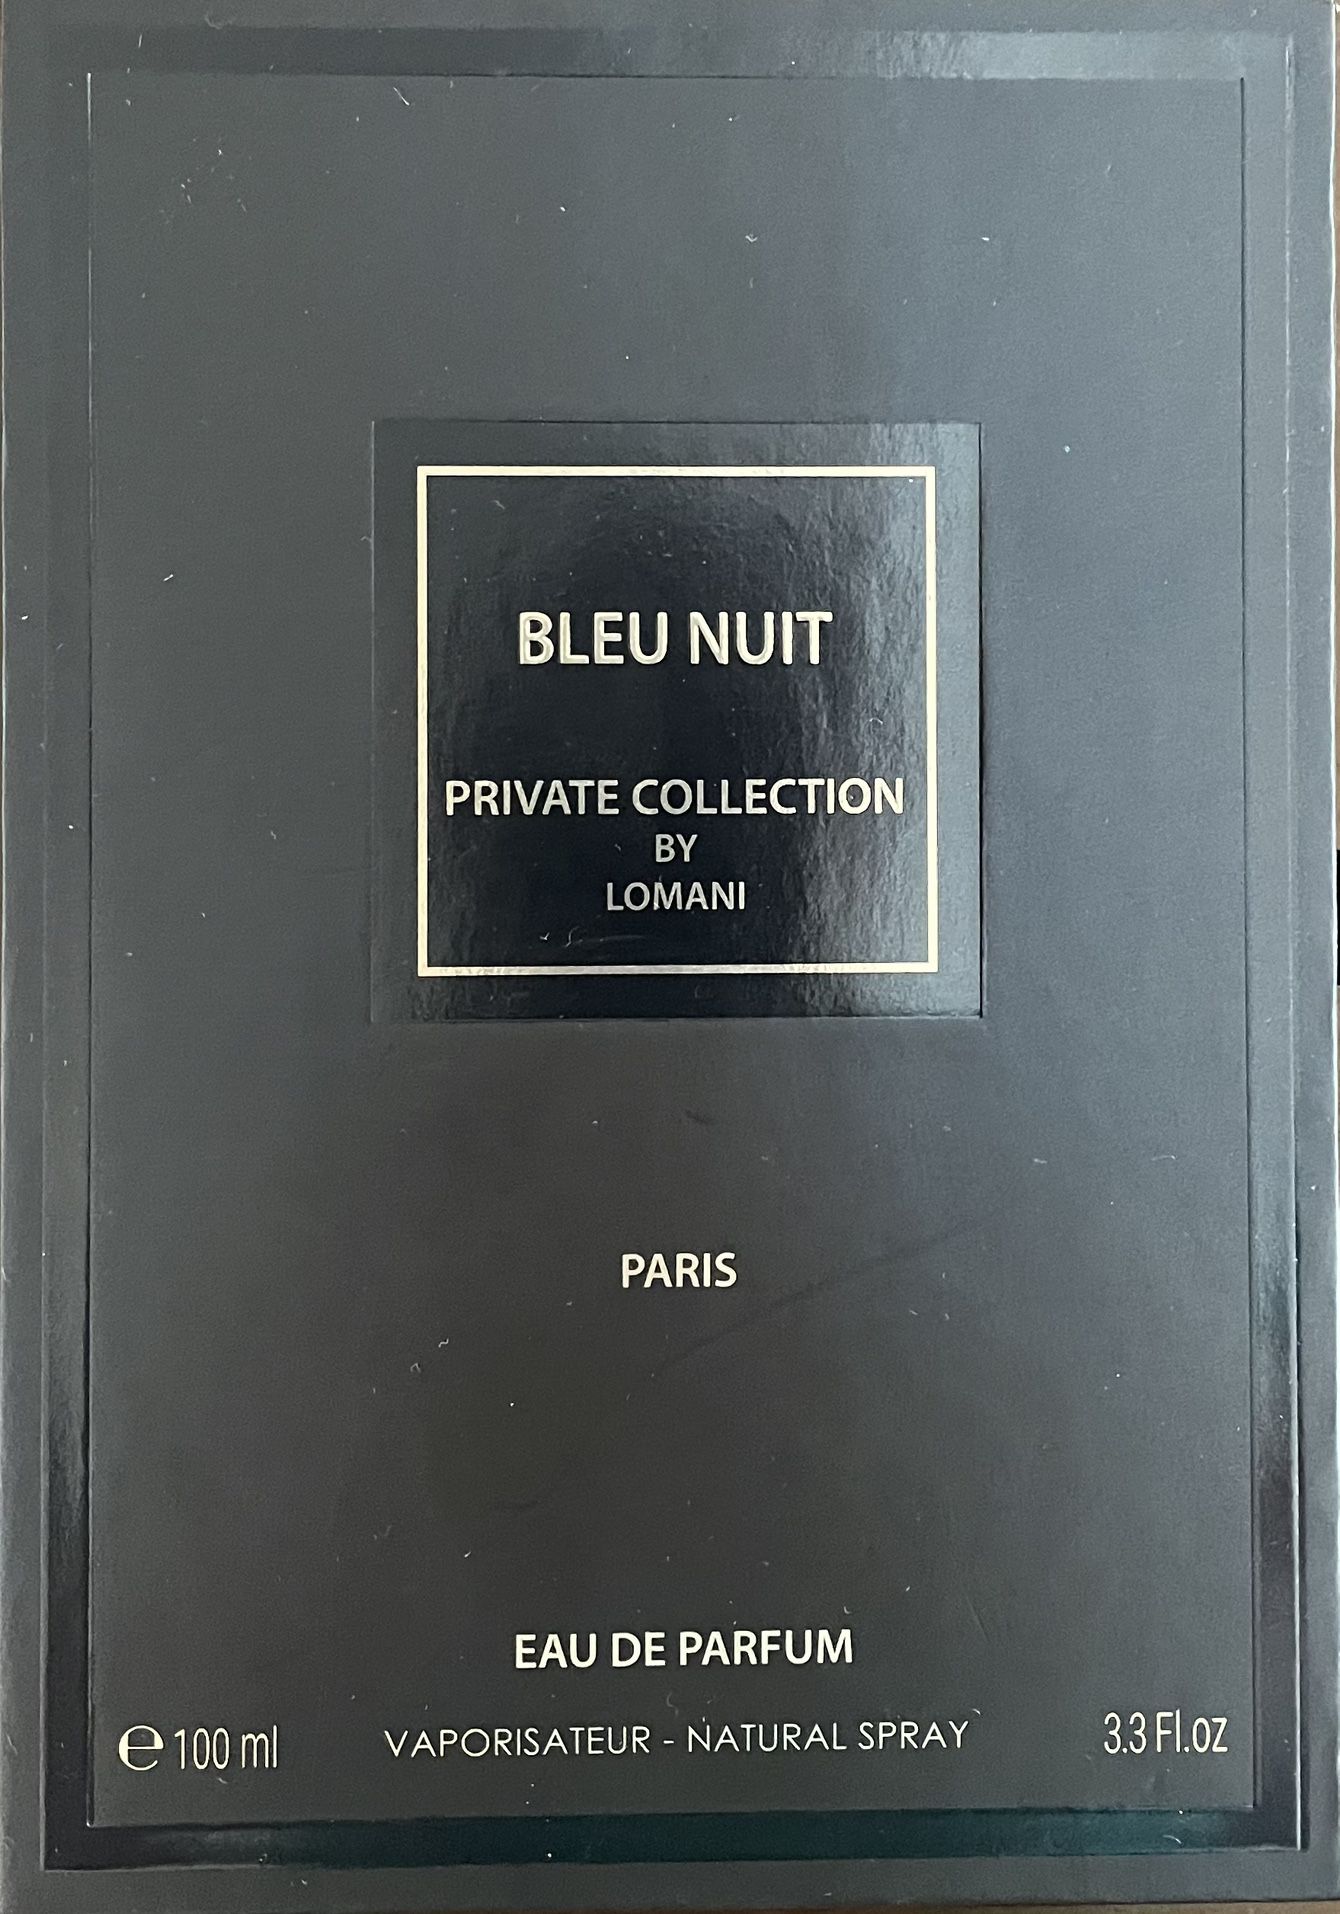 BLEU NUIT Private Collection by Lomani for Sale in New York, NY - OfferUp